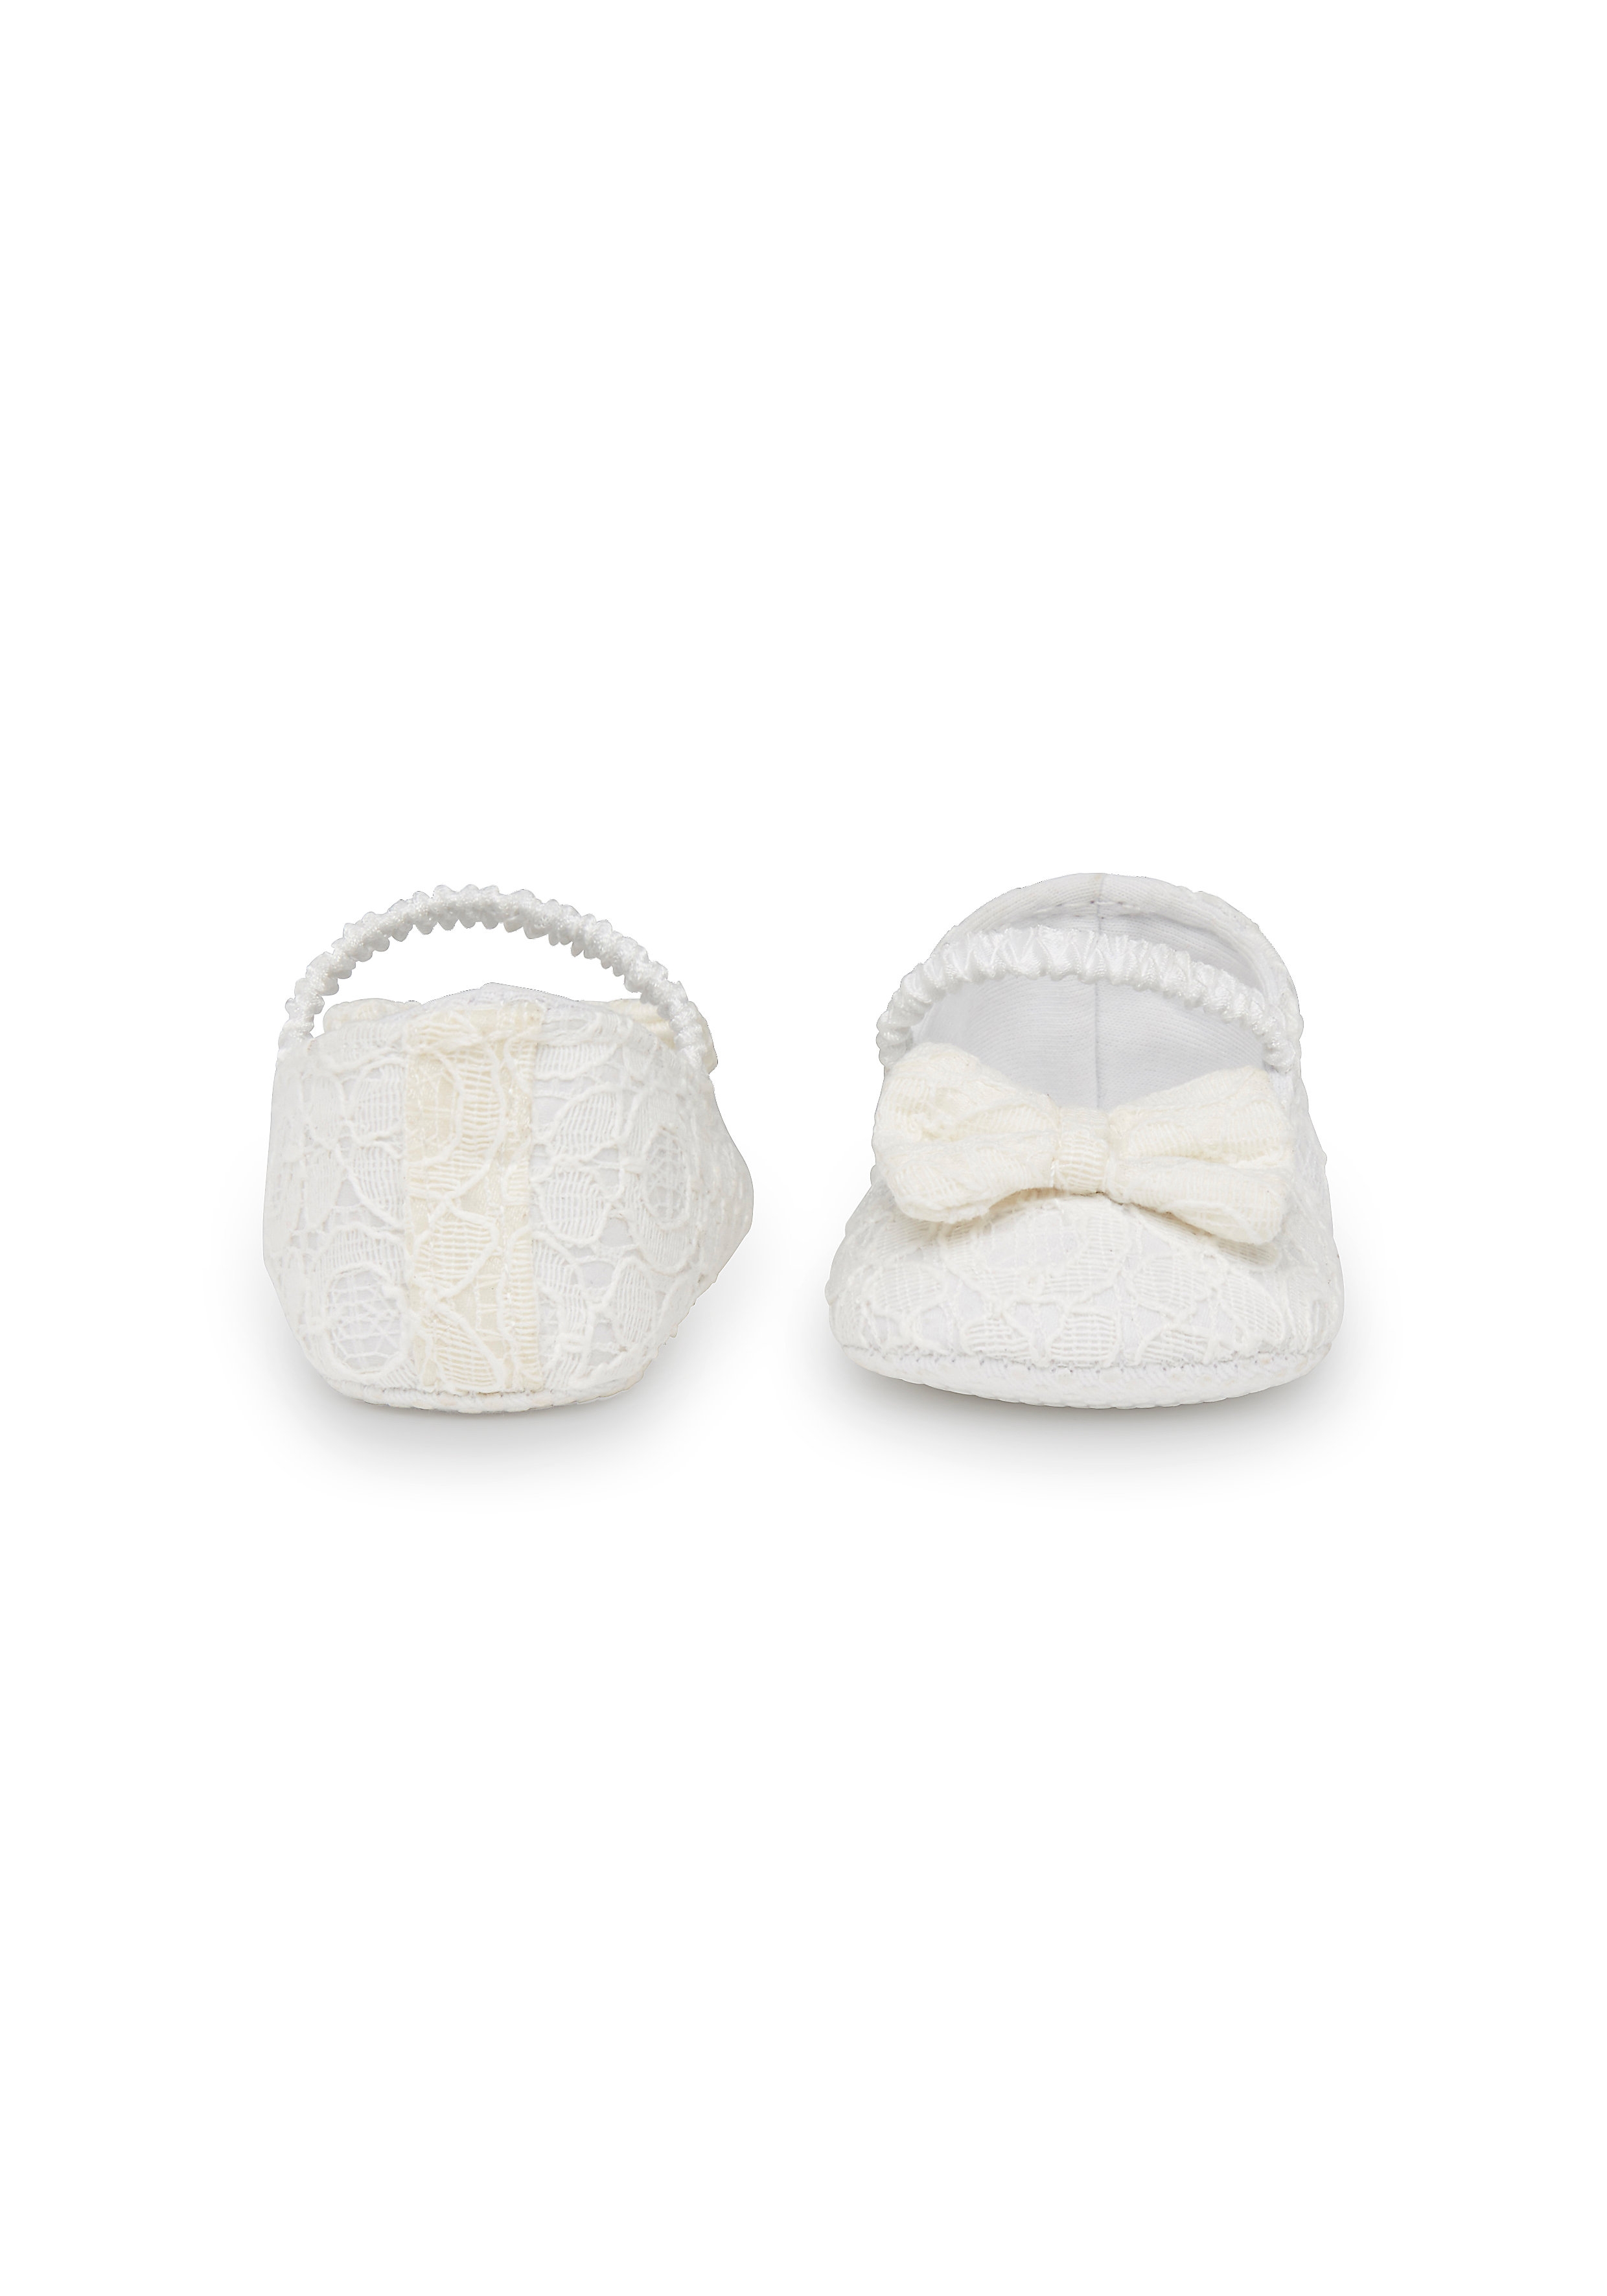 Mothercare | Girls Lace Occasion Shoes - Cream 1